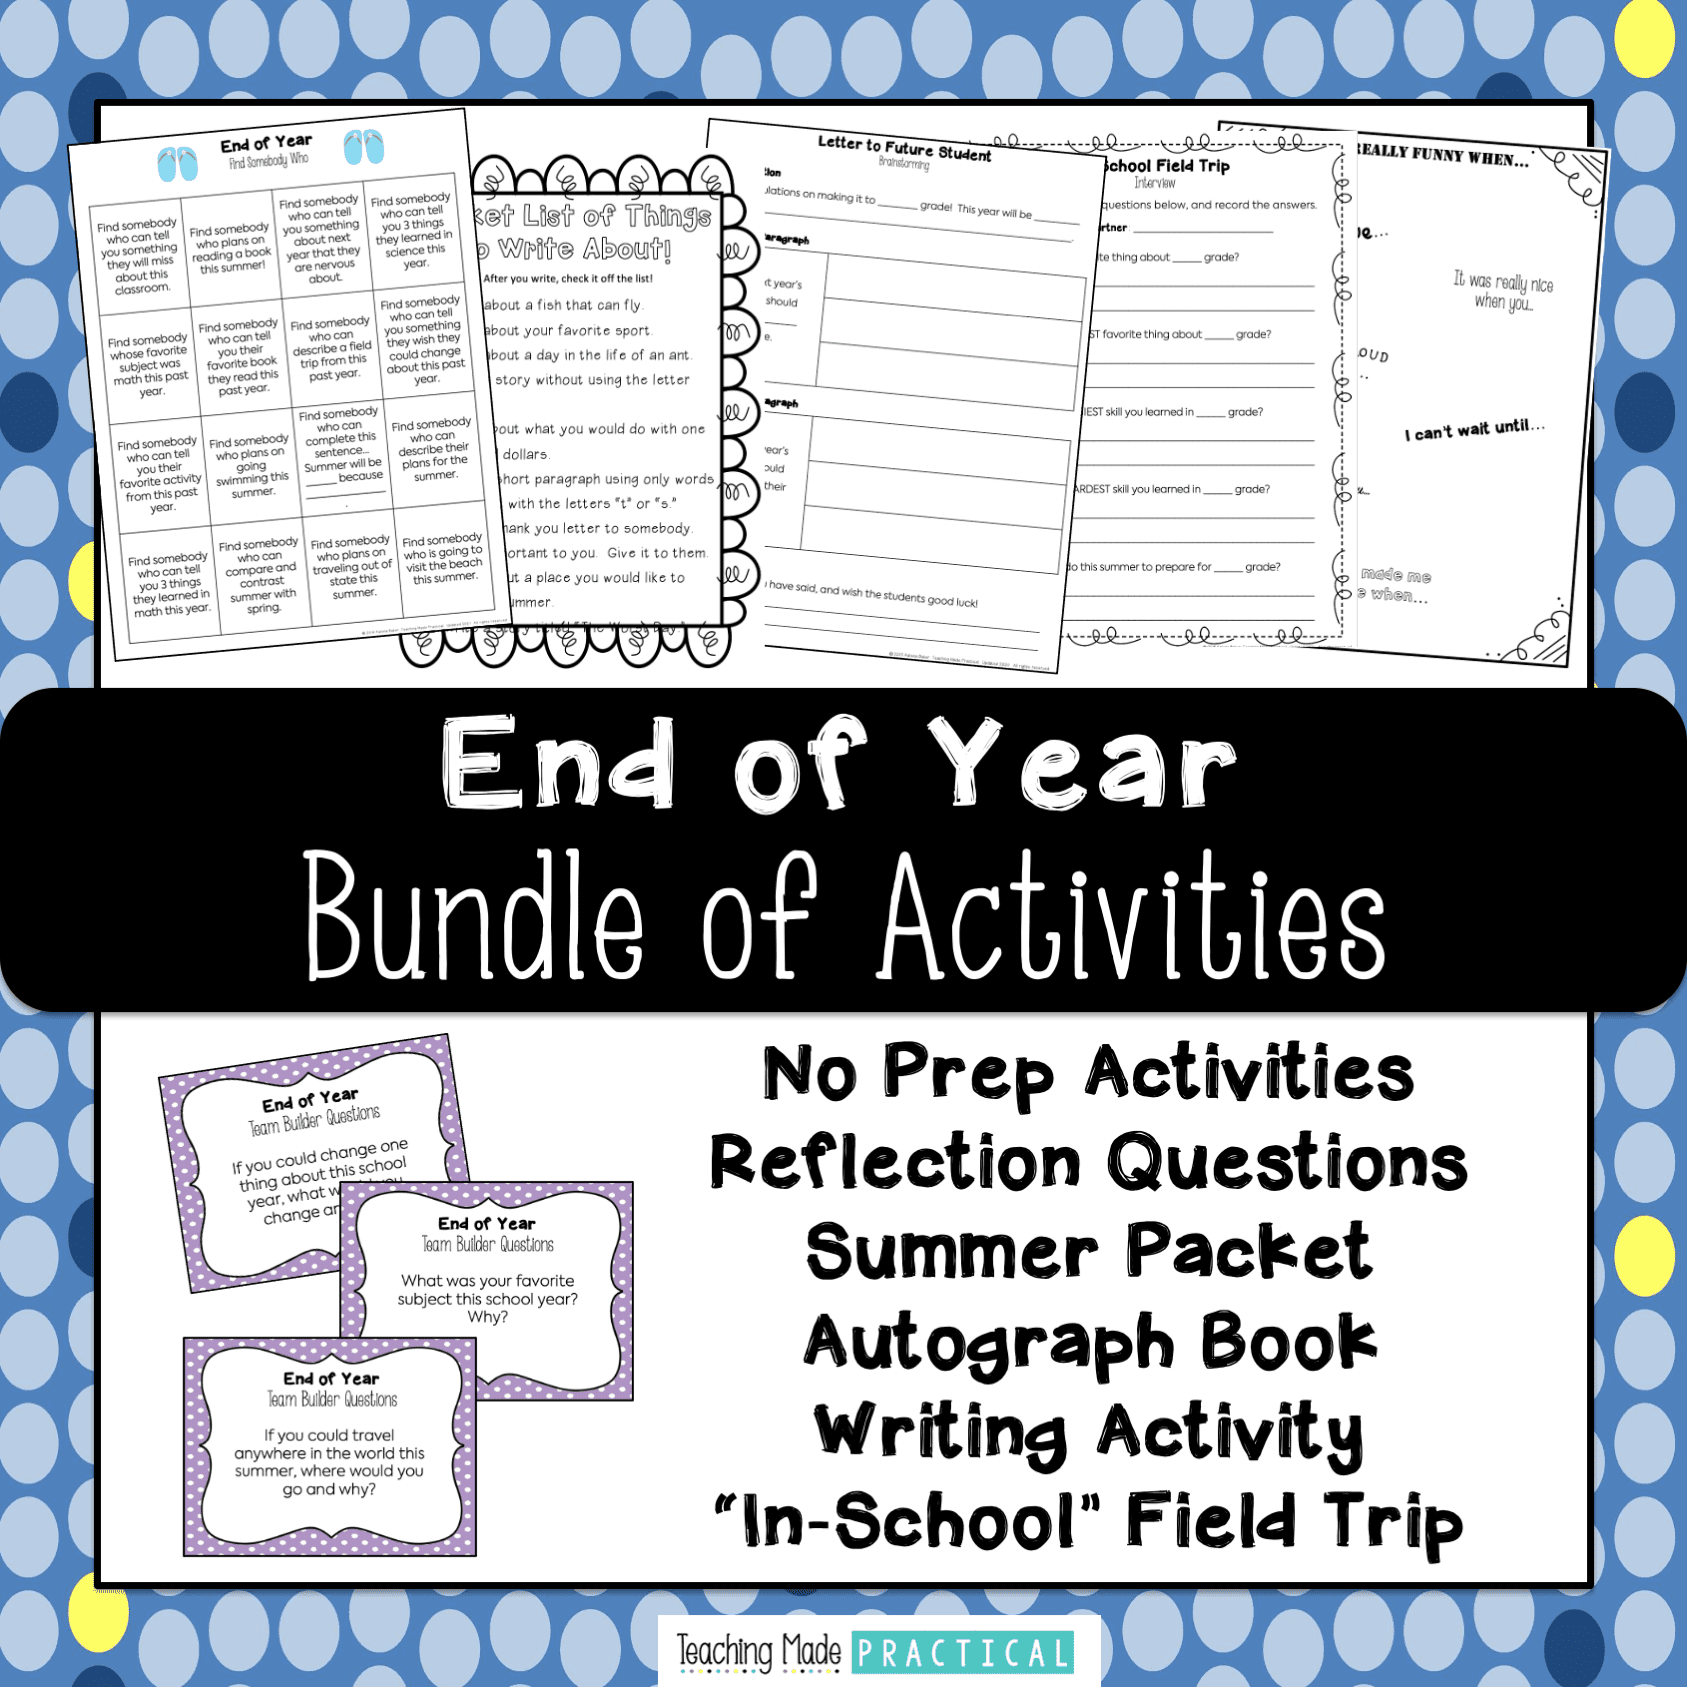 Everything you need for the end of the year - includes no prep activities, a scaffolded end of year letter to future students, a field trip to next year's classroom, and more. Great for 3rd grade or 4th grade students.